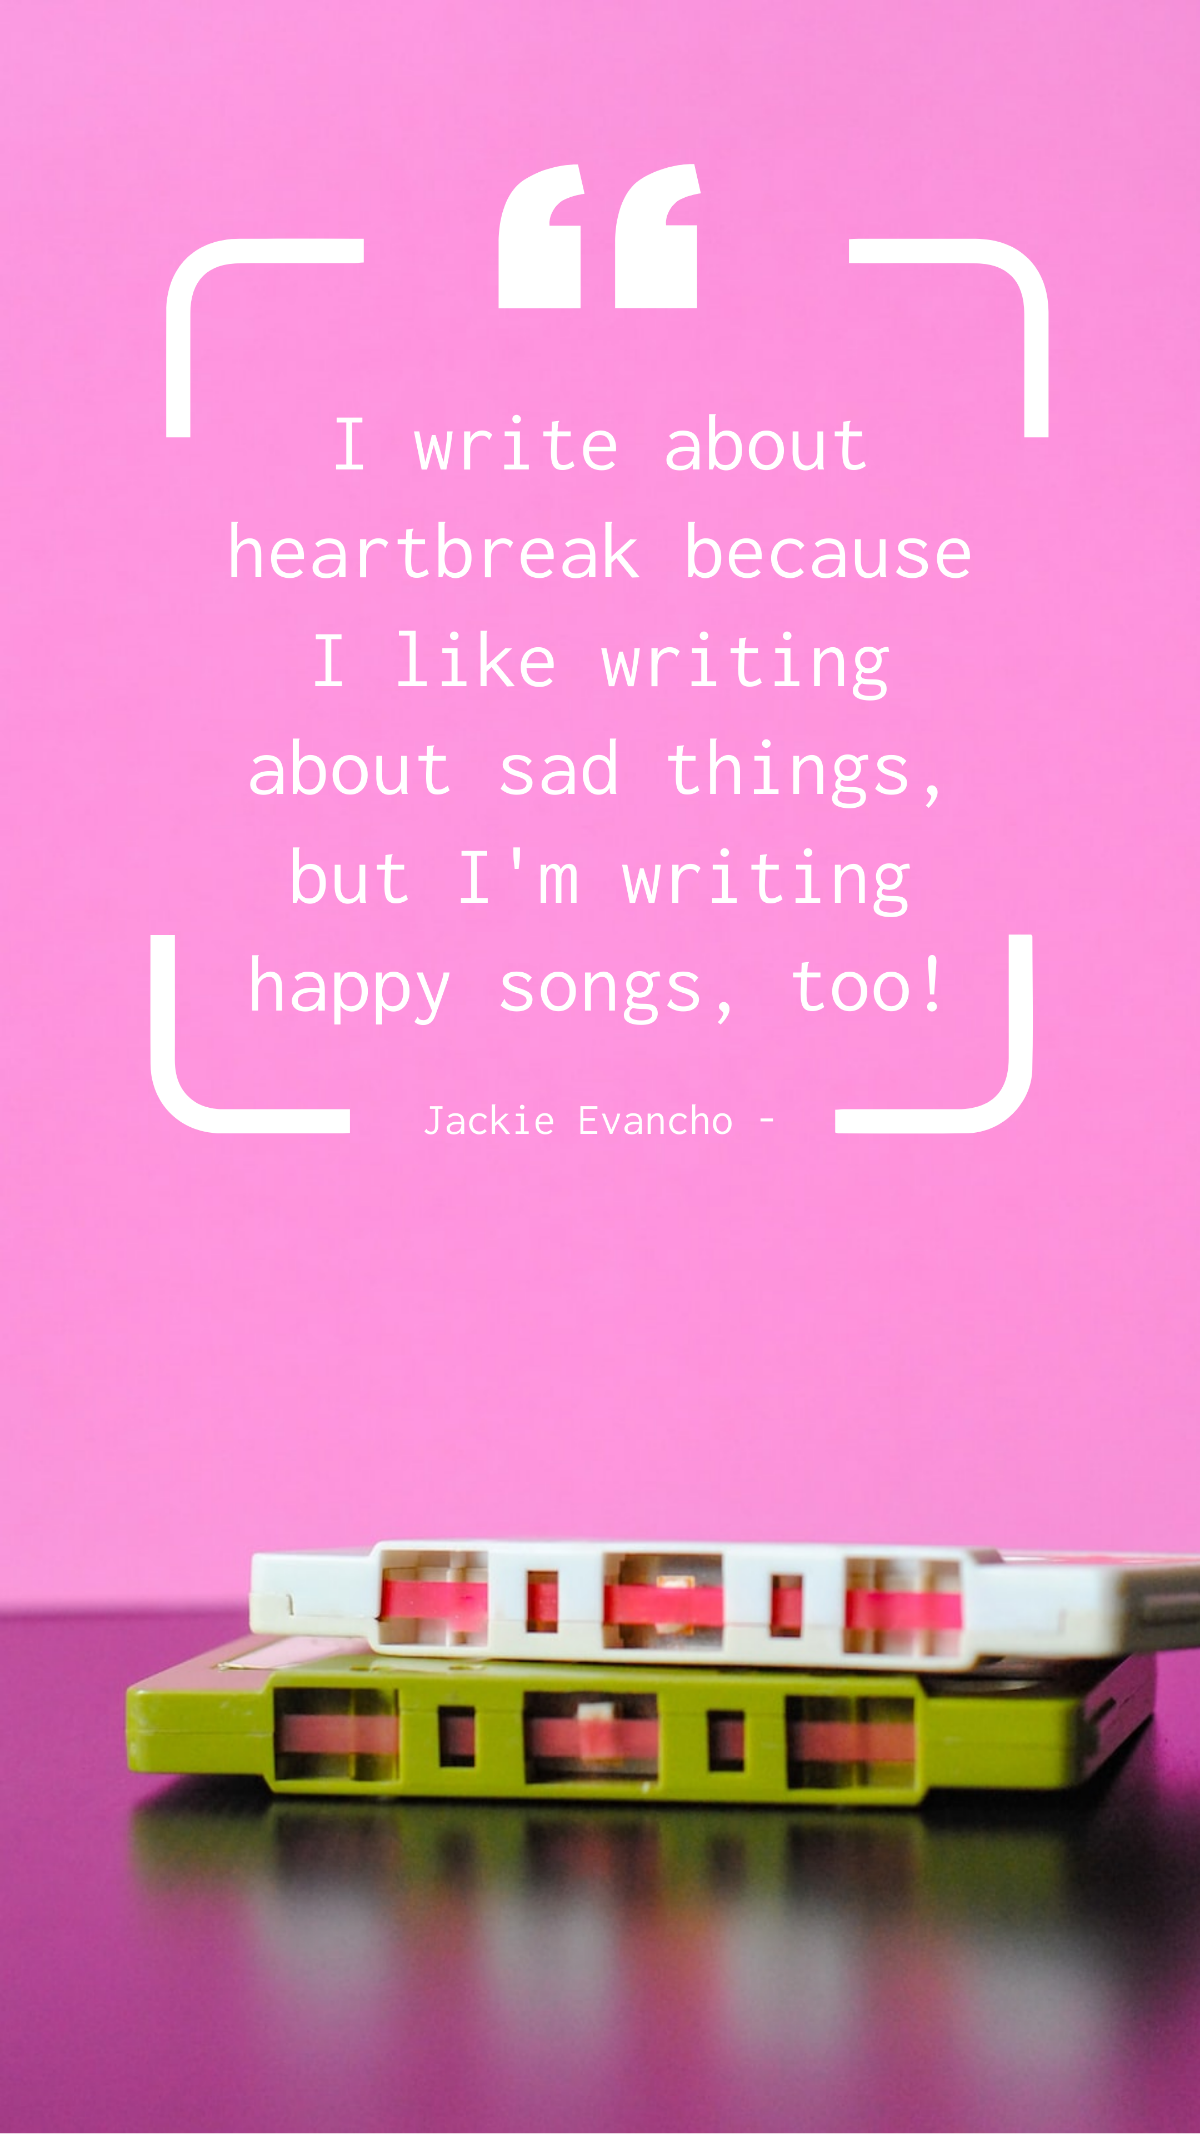 Jackie Evancho - I write about heartbreak because I like writing about sad things, but I'm writing happy songs, too! Template